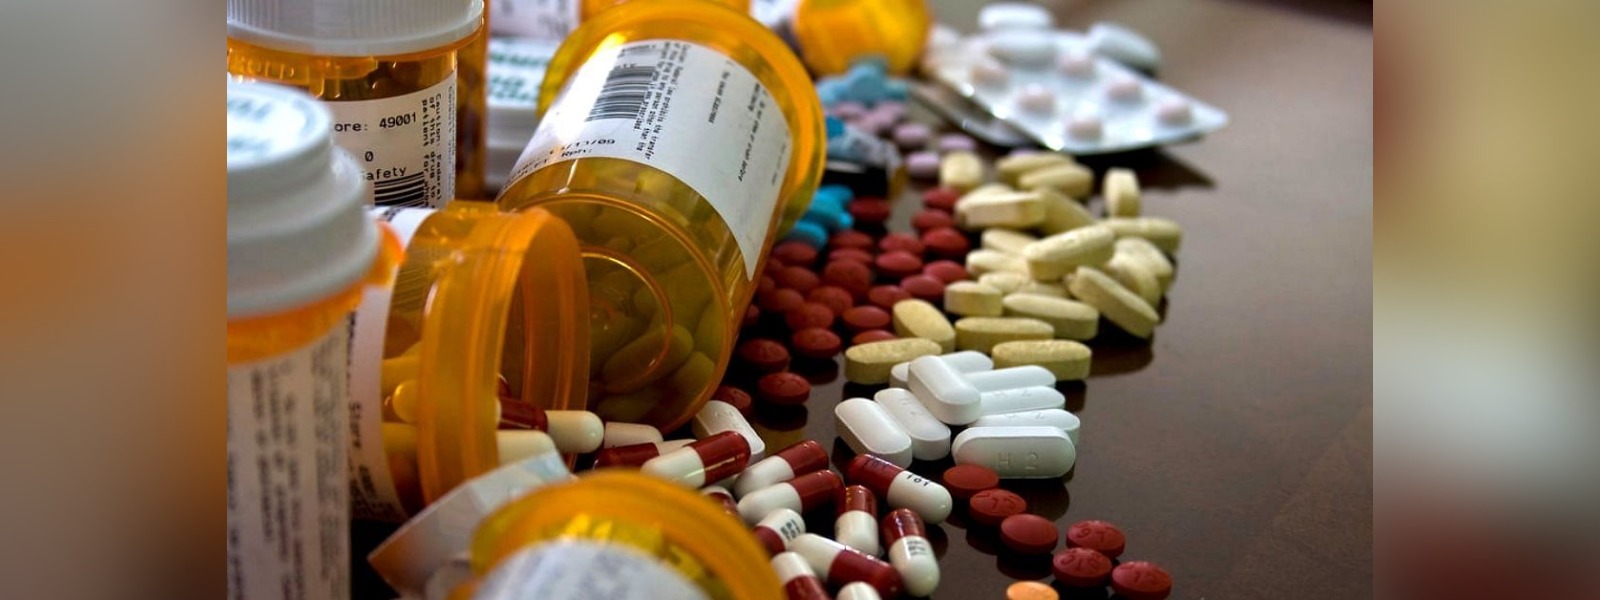 Medicine Prices to be reviewed every two weeks